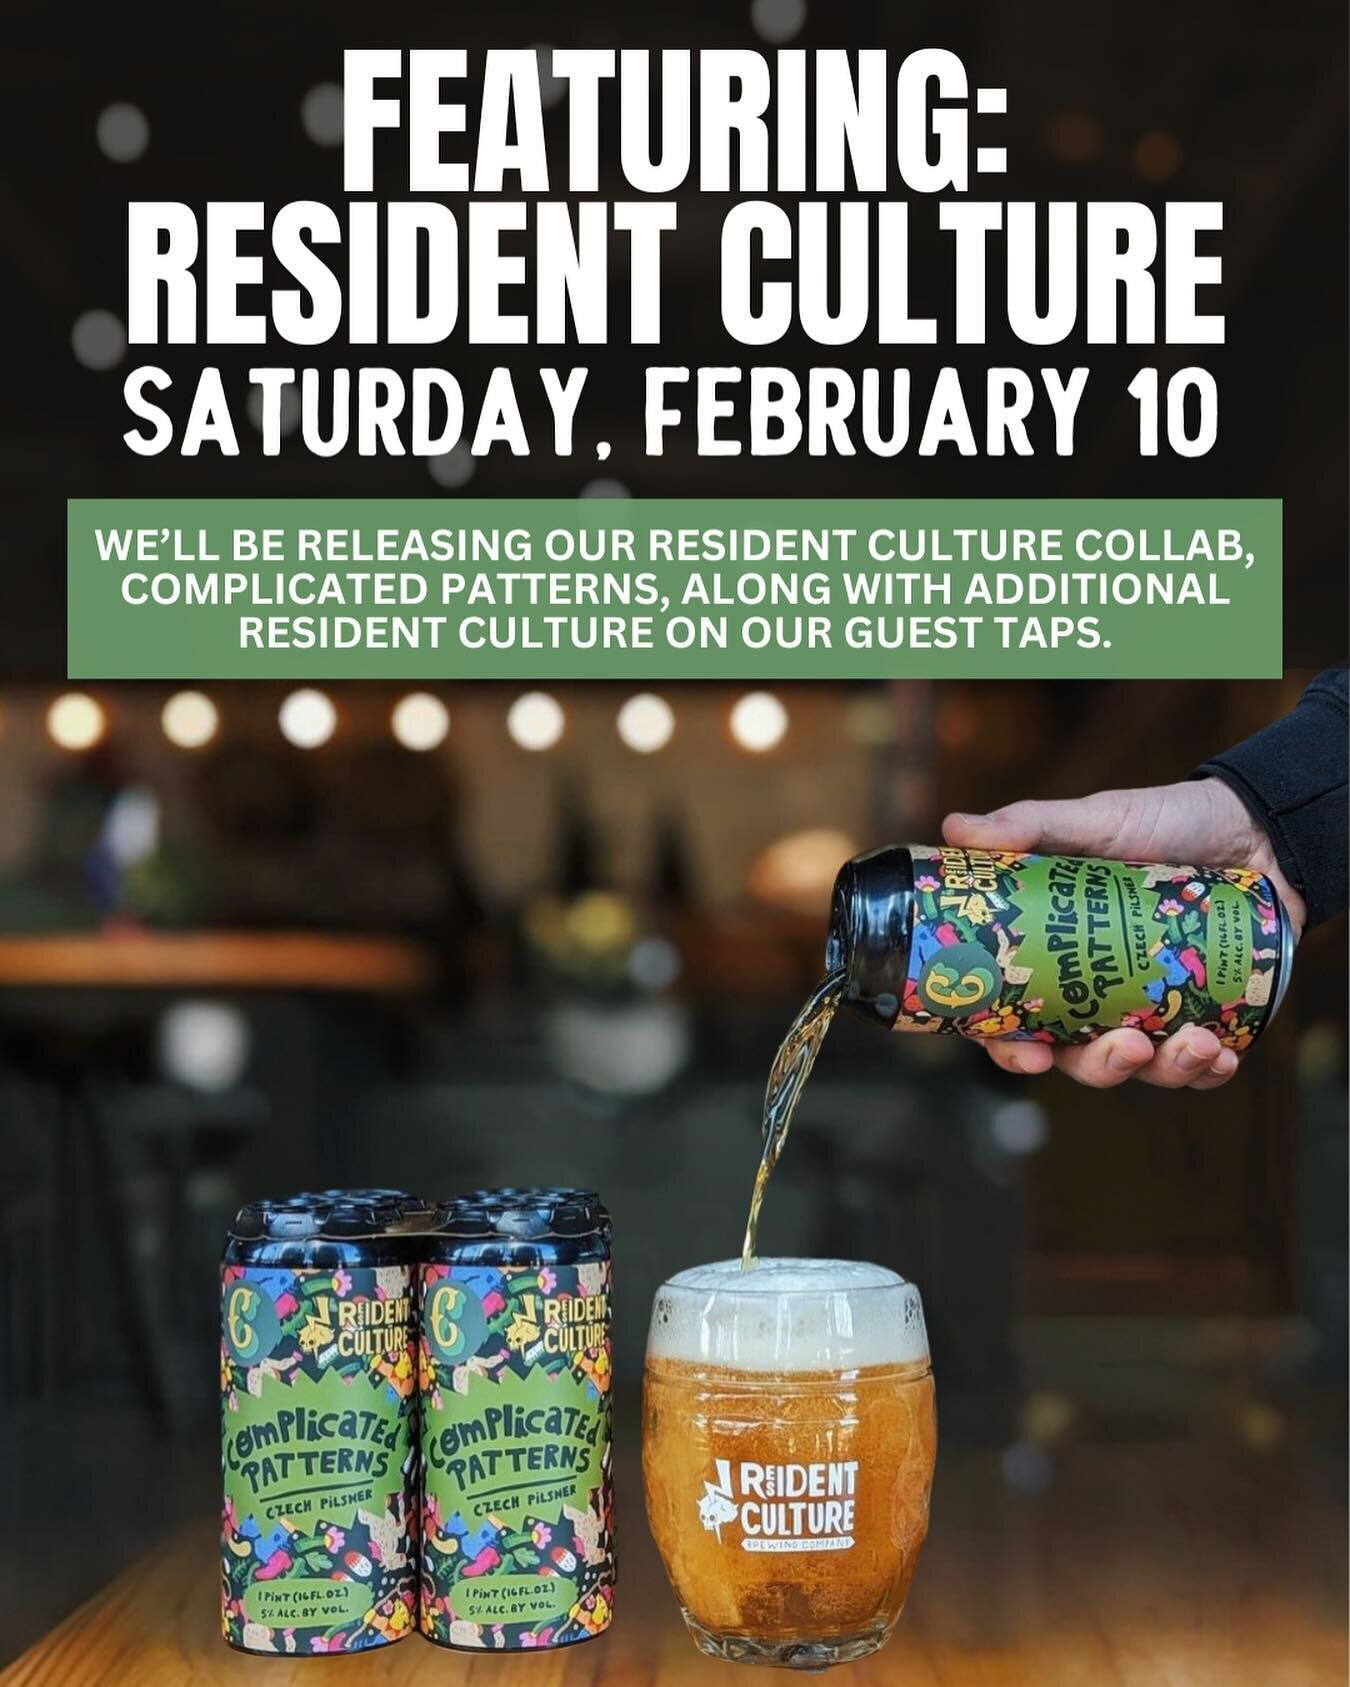 Don&rsquo;t miss this Saturday we have in store for you! We&rsquo;ll be releasing our Resident Culture collab, Complicated Patterns, along with featuring two additional Resident Culture beers all the way from Charlotte, North Carolina on our guest ta